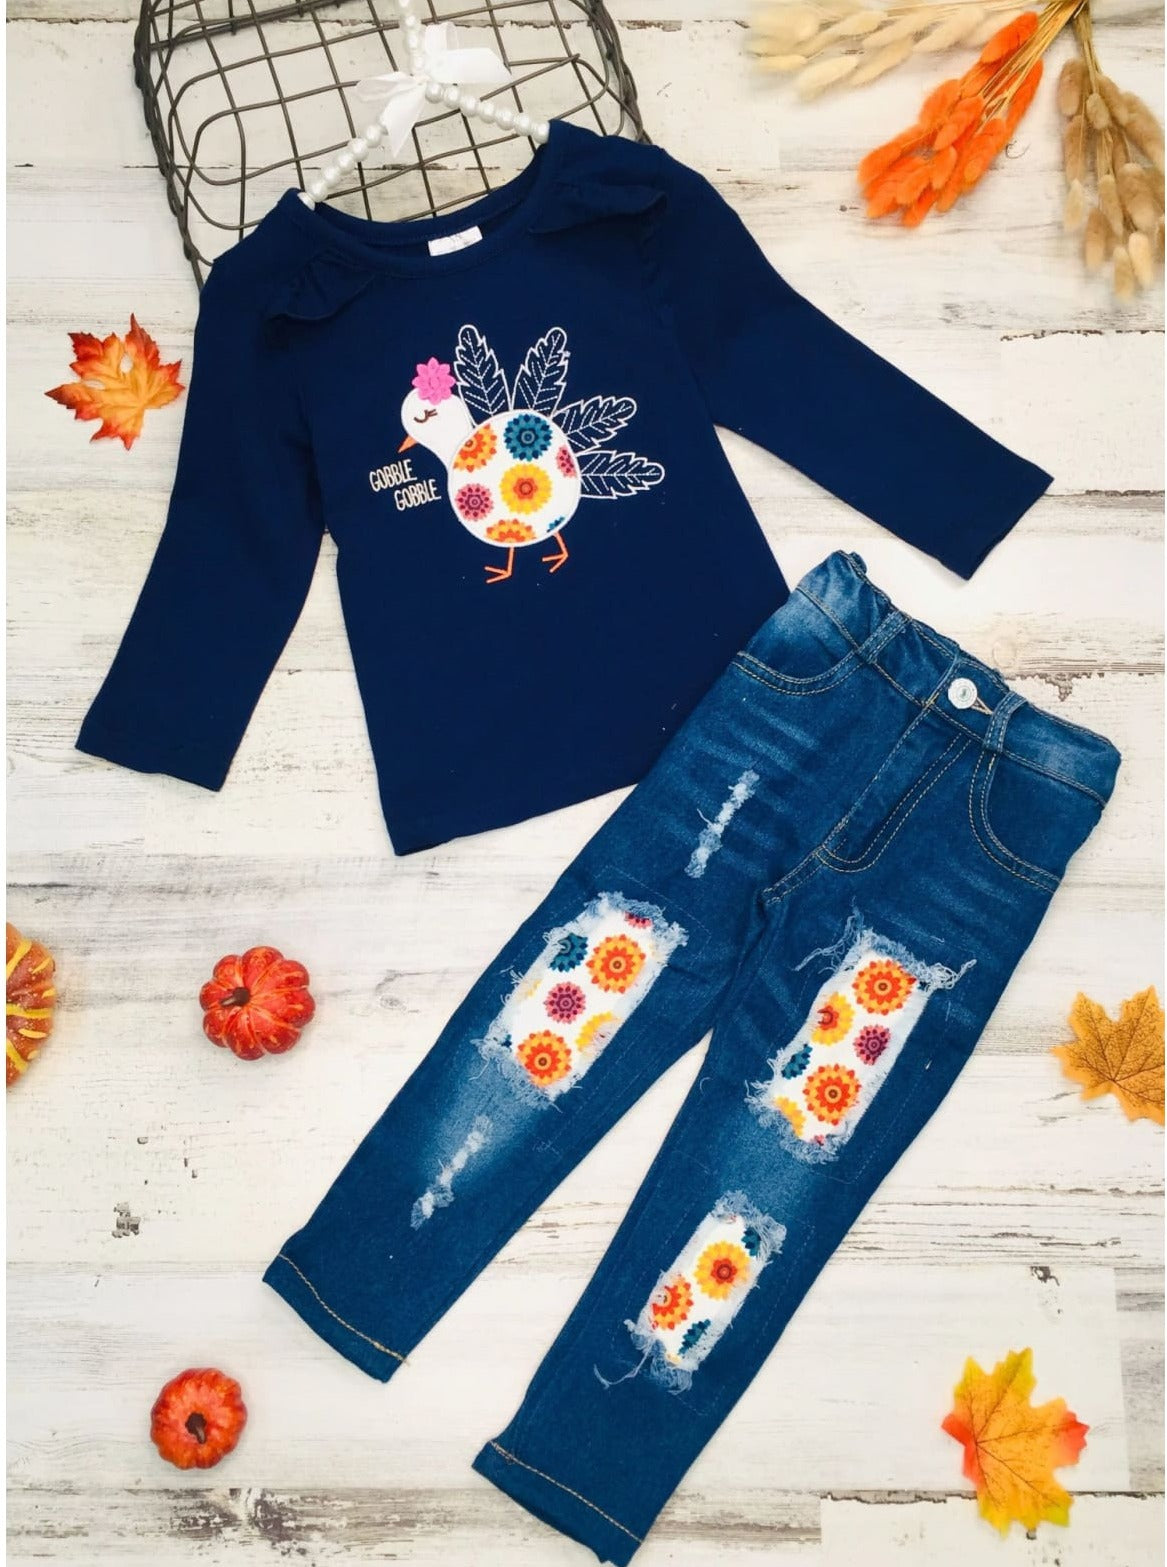 Little girls Thanksgiving long-sleeve top with ruffle shoulder accents, "Gobble Gobble" floral turkey graphic, and matching patched jeans - Mia Belle Girls